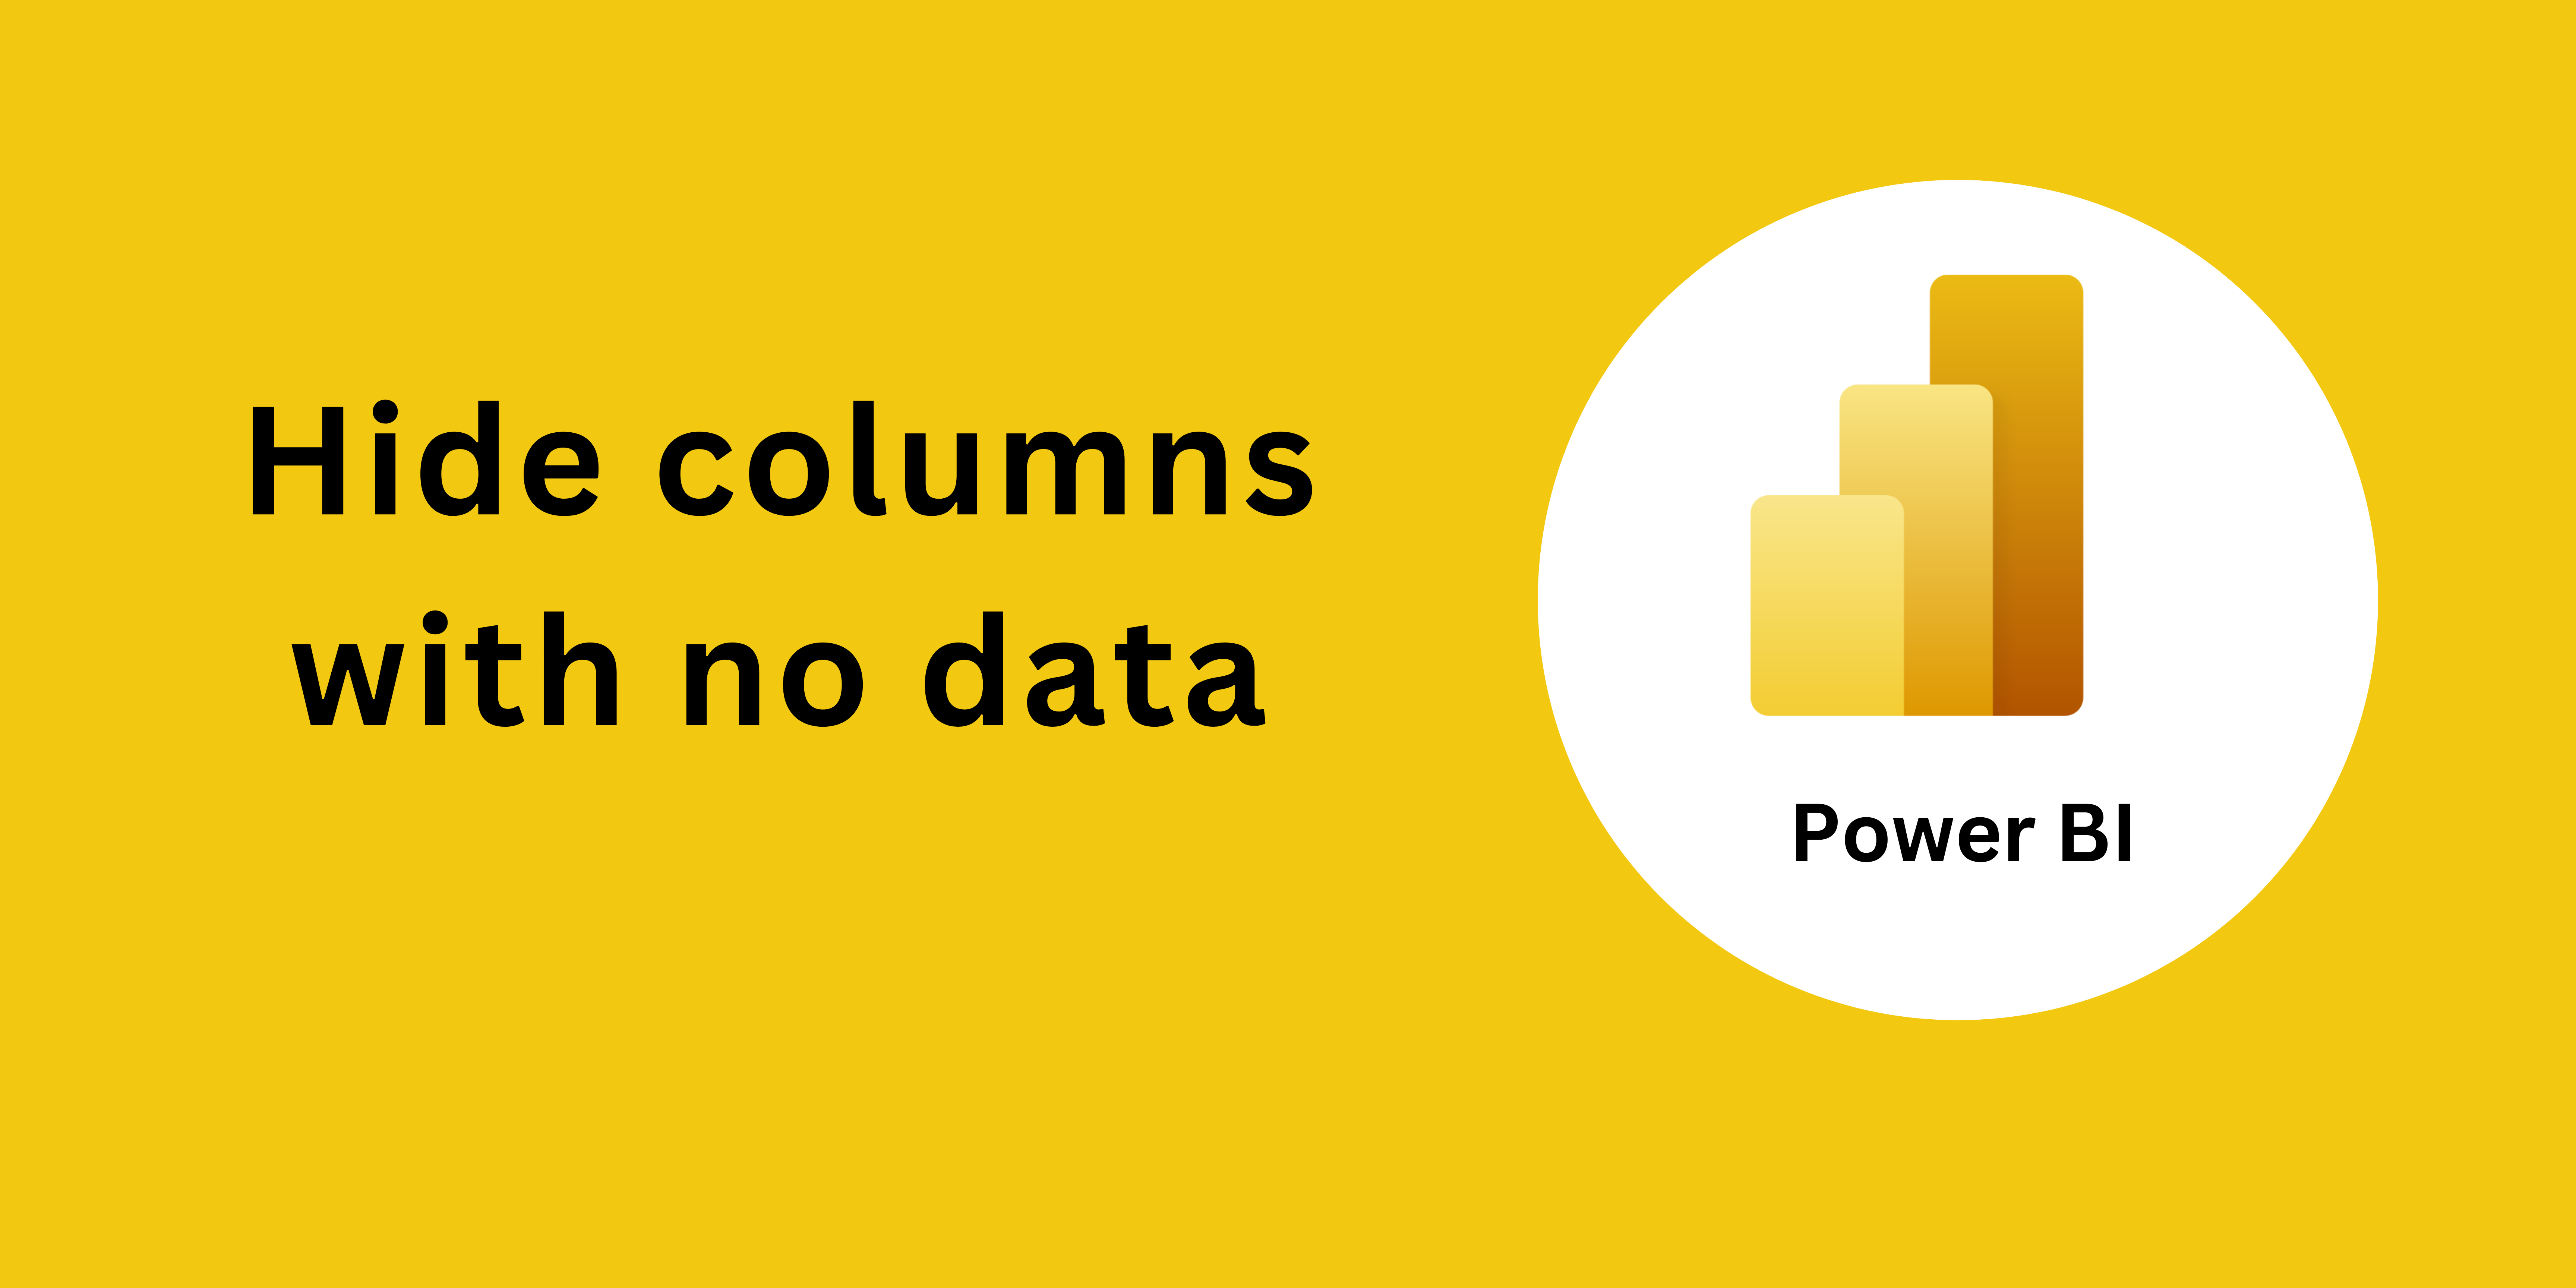 Power BI: How to Hide columns with No data